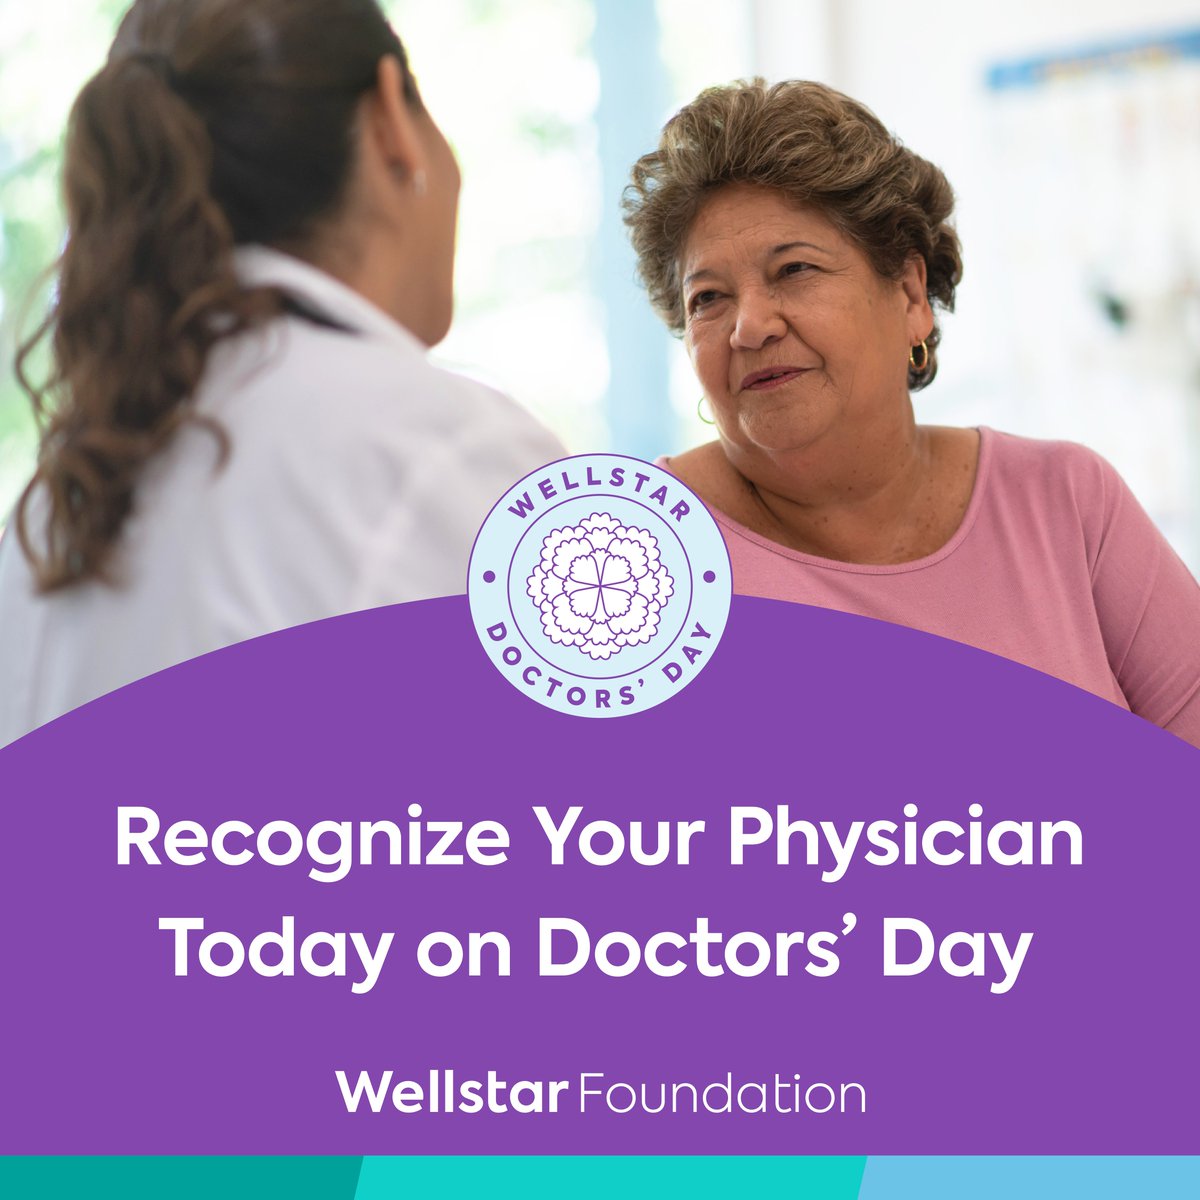 Honor your physician today on National Doctors' Day with a gift to the Wellstar Foundation. We will proudly honor your physician with a pin to wear on their white coat. Their name will also be published on the Wellstar Foundation website. Give today at spr.ly/6011ZTvwT.